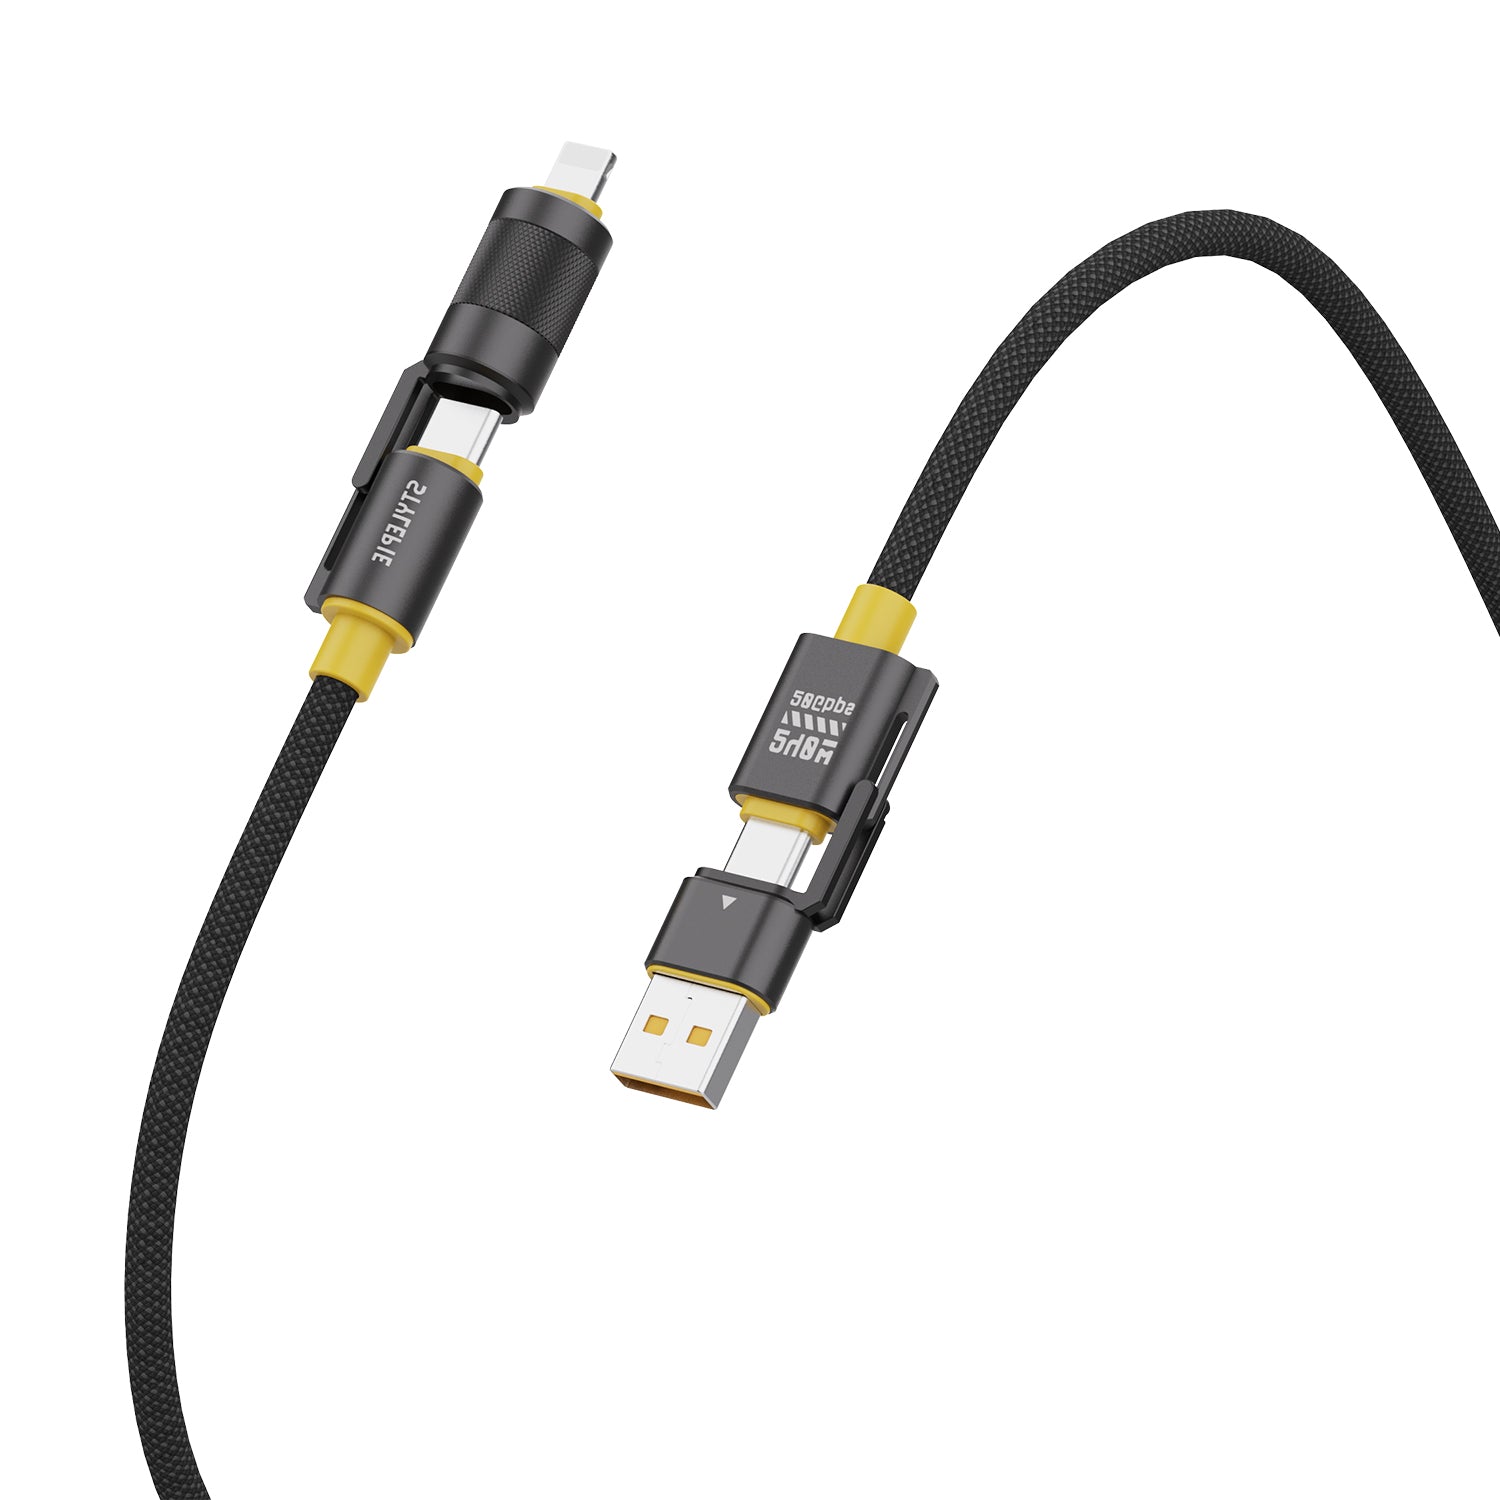 O2W SELECTION Stylepie C74 240W 4 in 1 Fast Charge Data Cable Ultra Edition USB4 Gen2, PD3.1